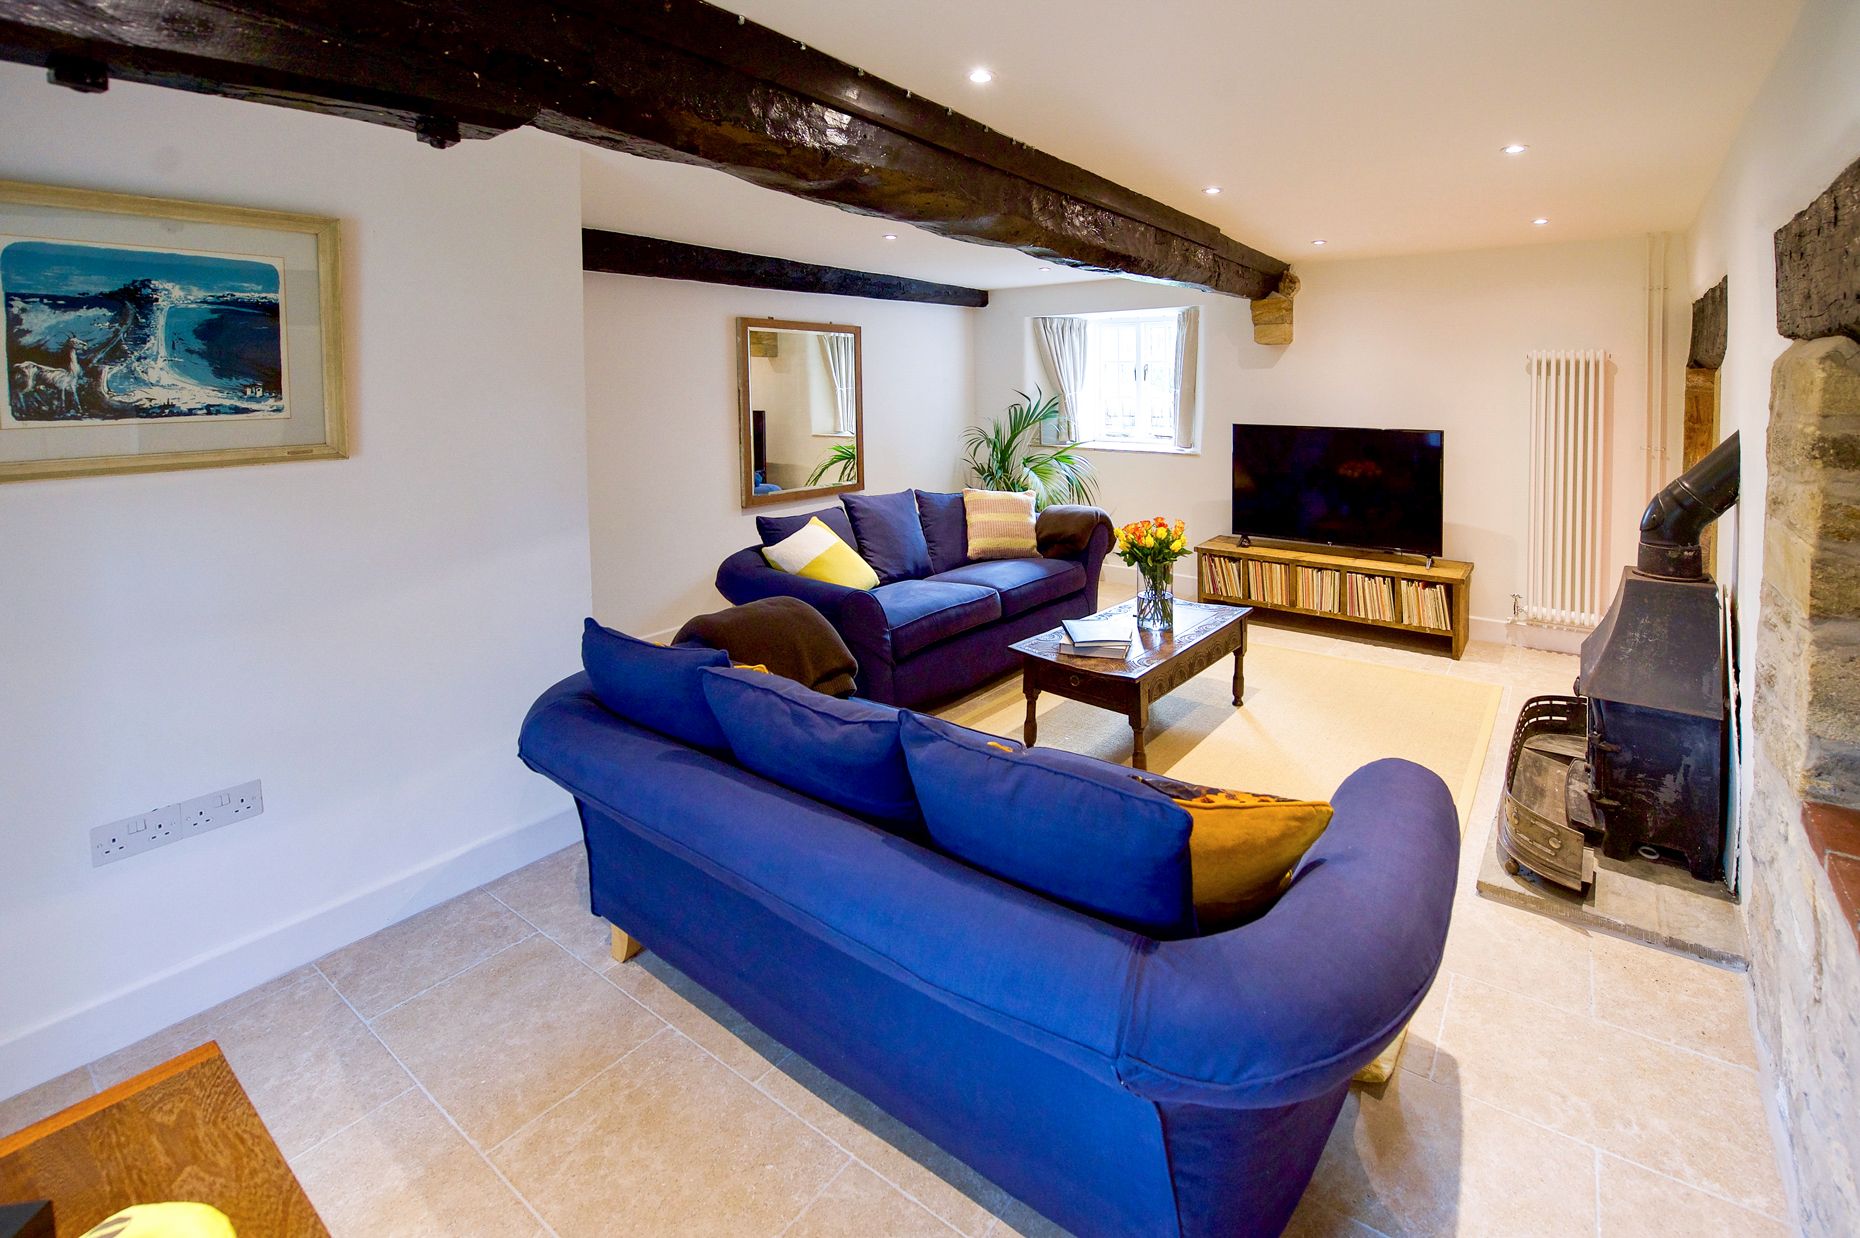 Bake House Cottage is located in Sherborne and surrounding villages